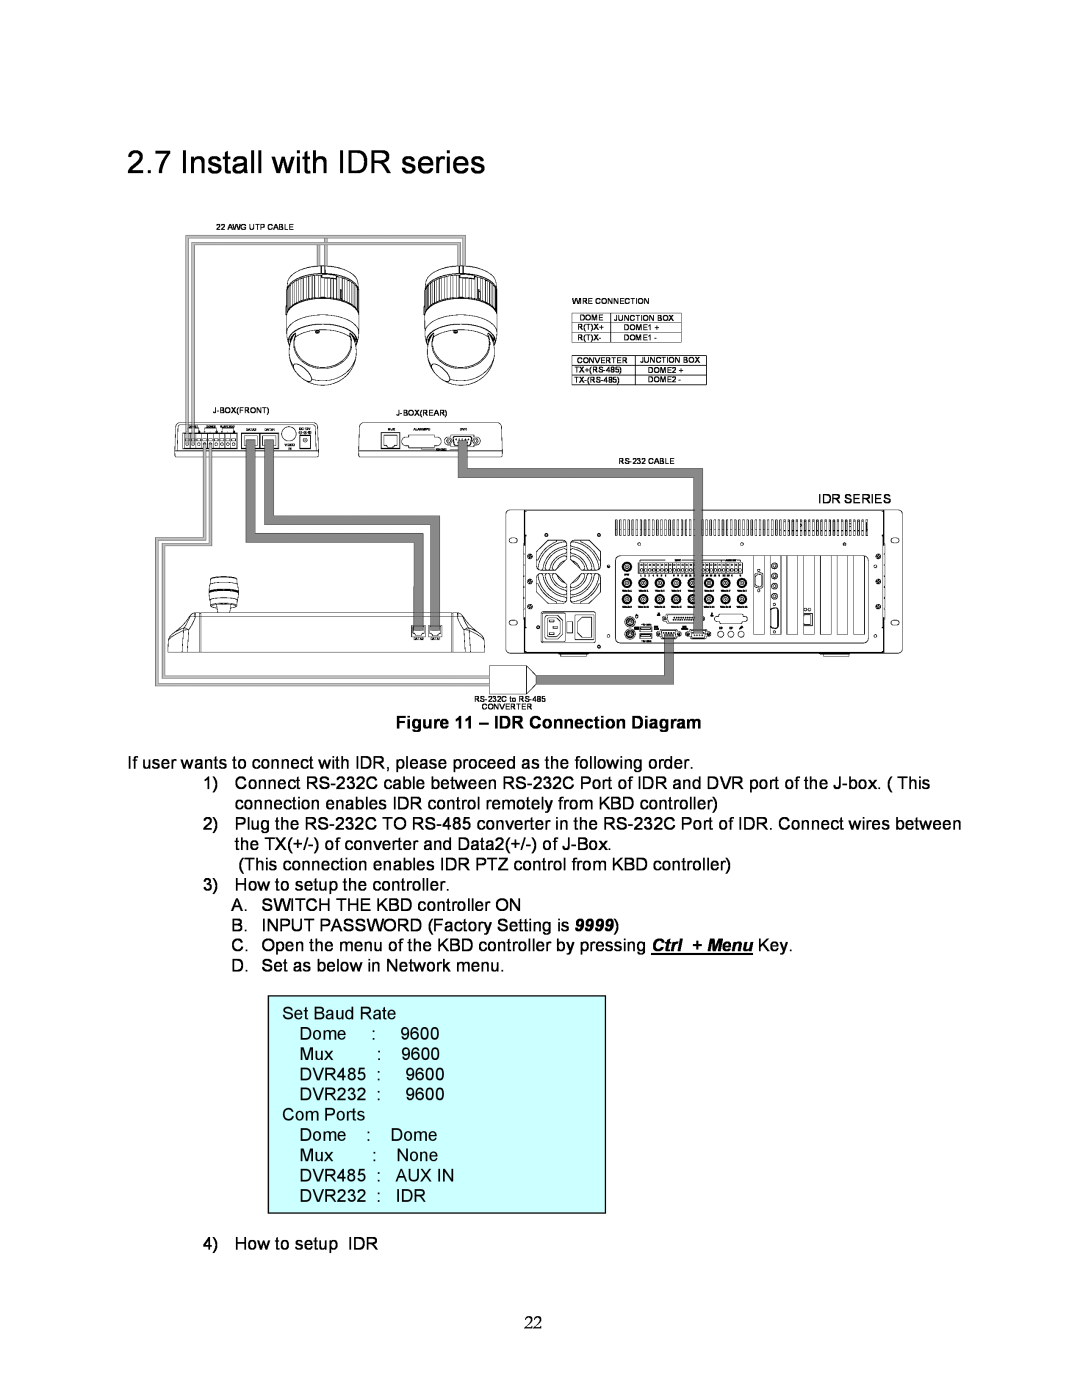 Speco Technologies KBD-927 instruction manual Install with IDR series, IDR Connection Diagram 